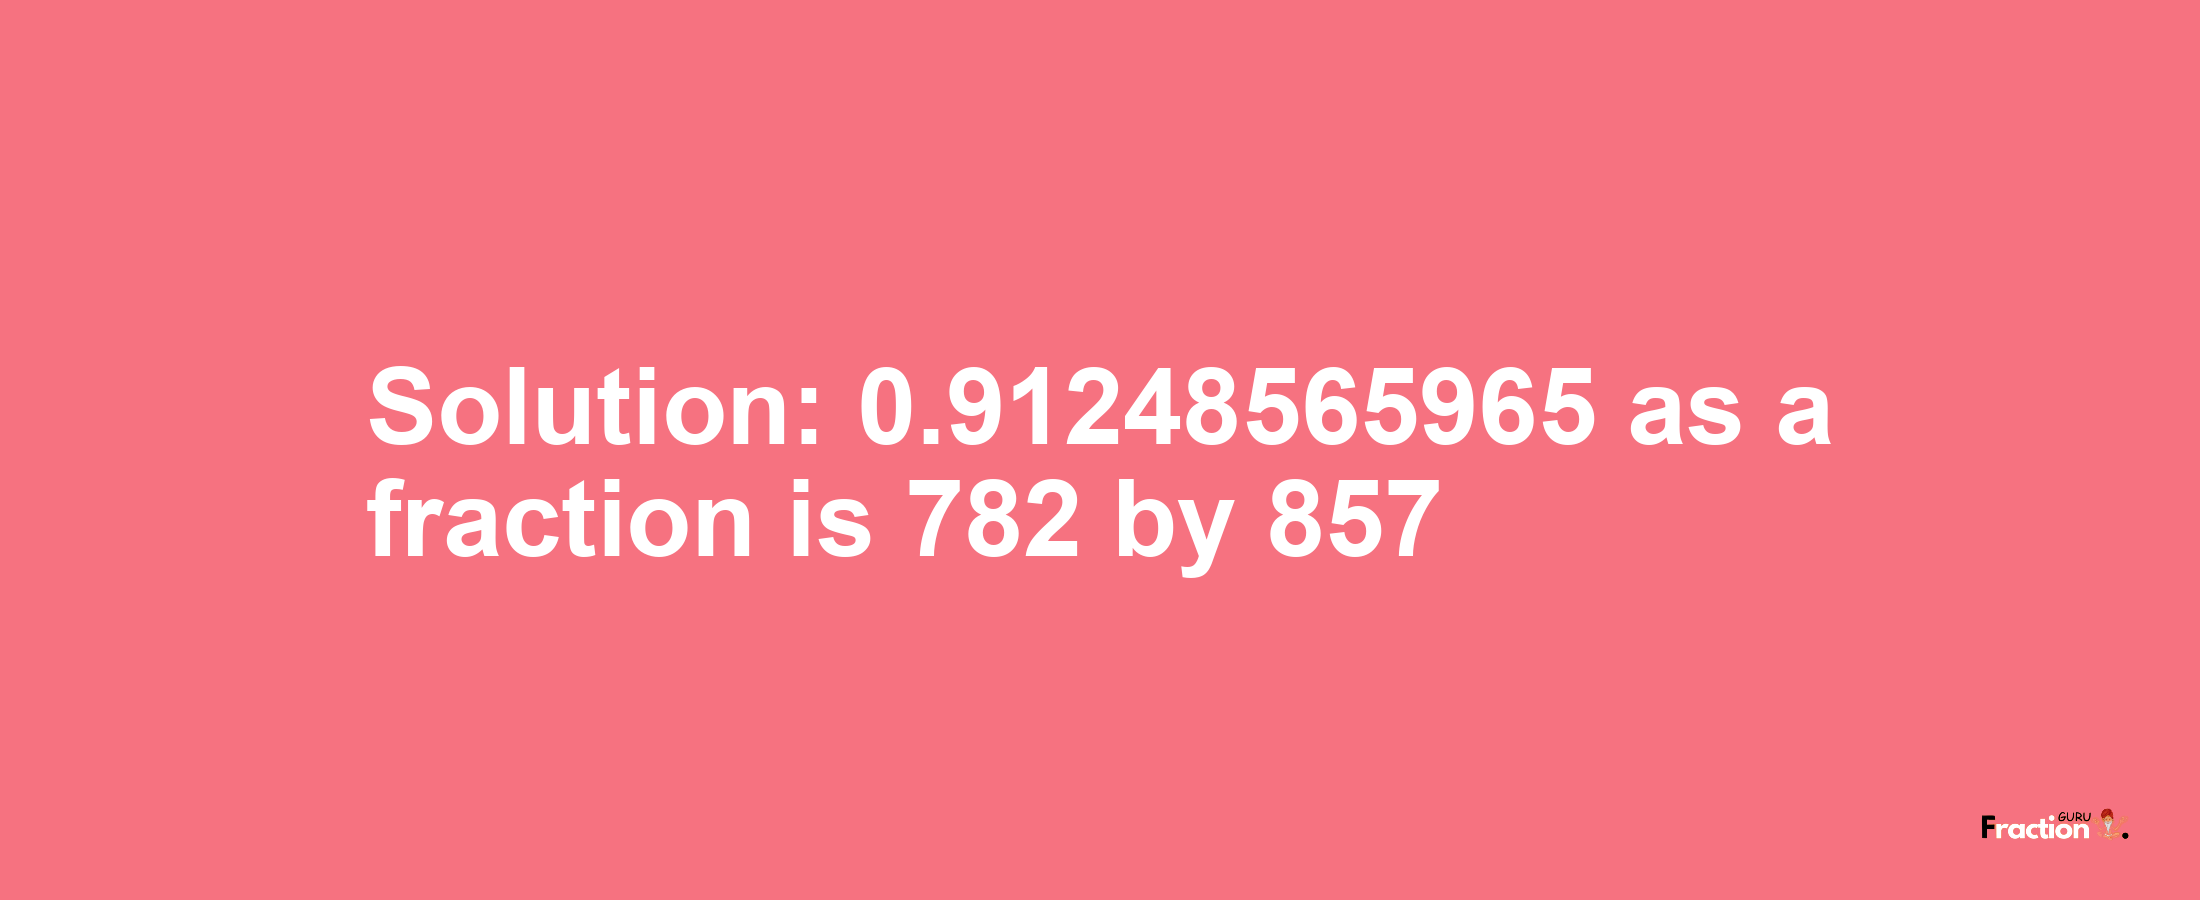 Solution:0.91248565965 as a fraction is 782/857